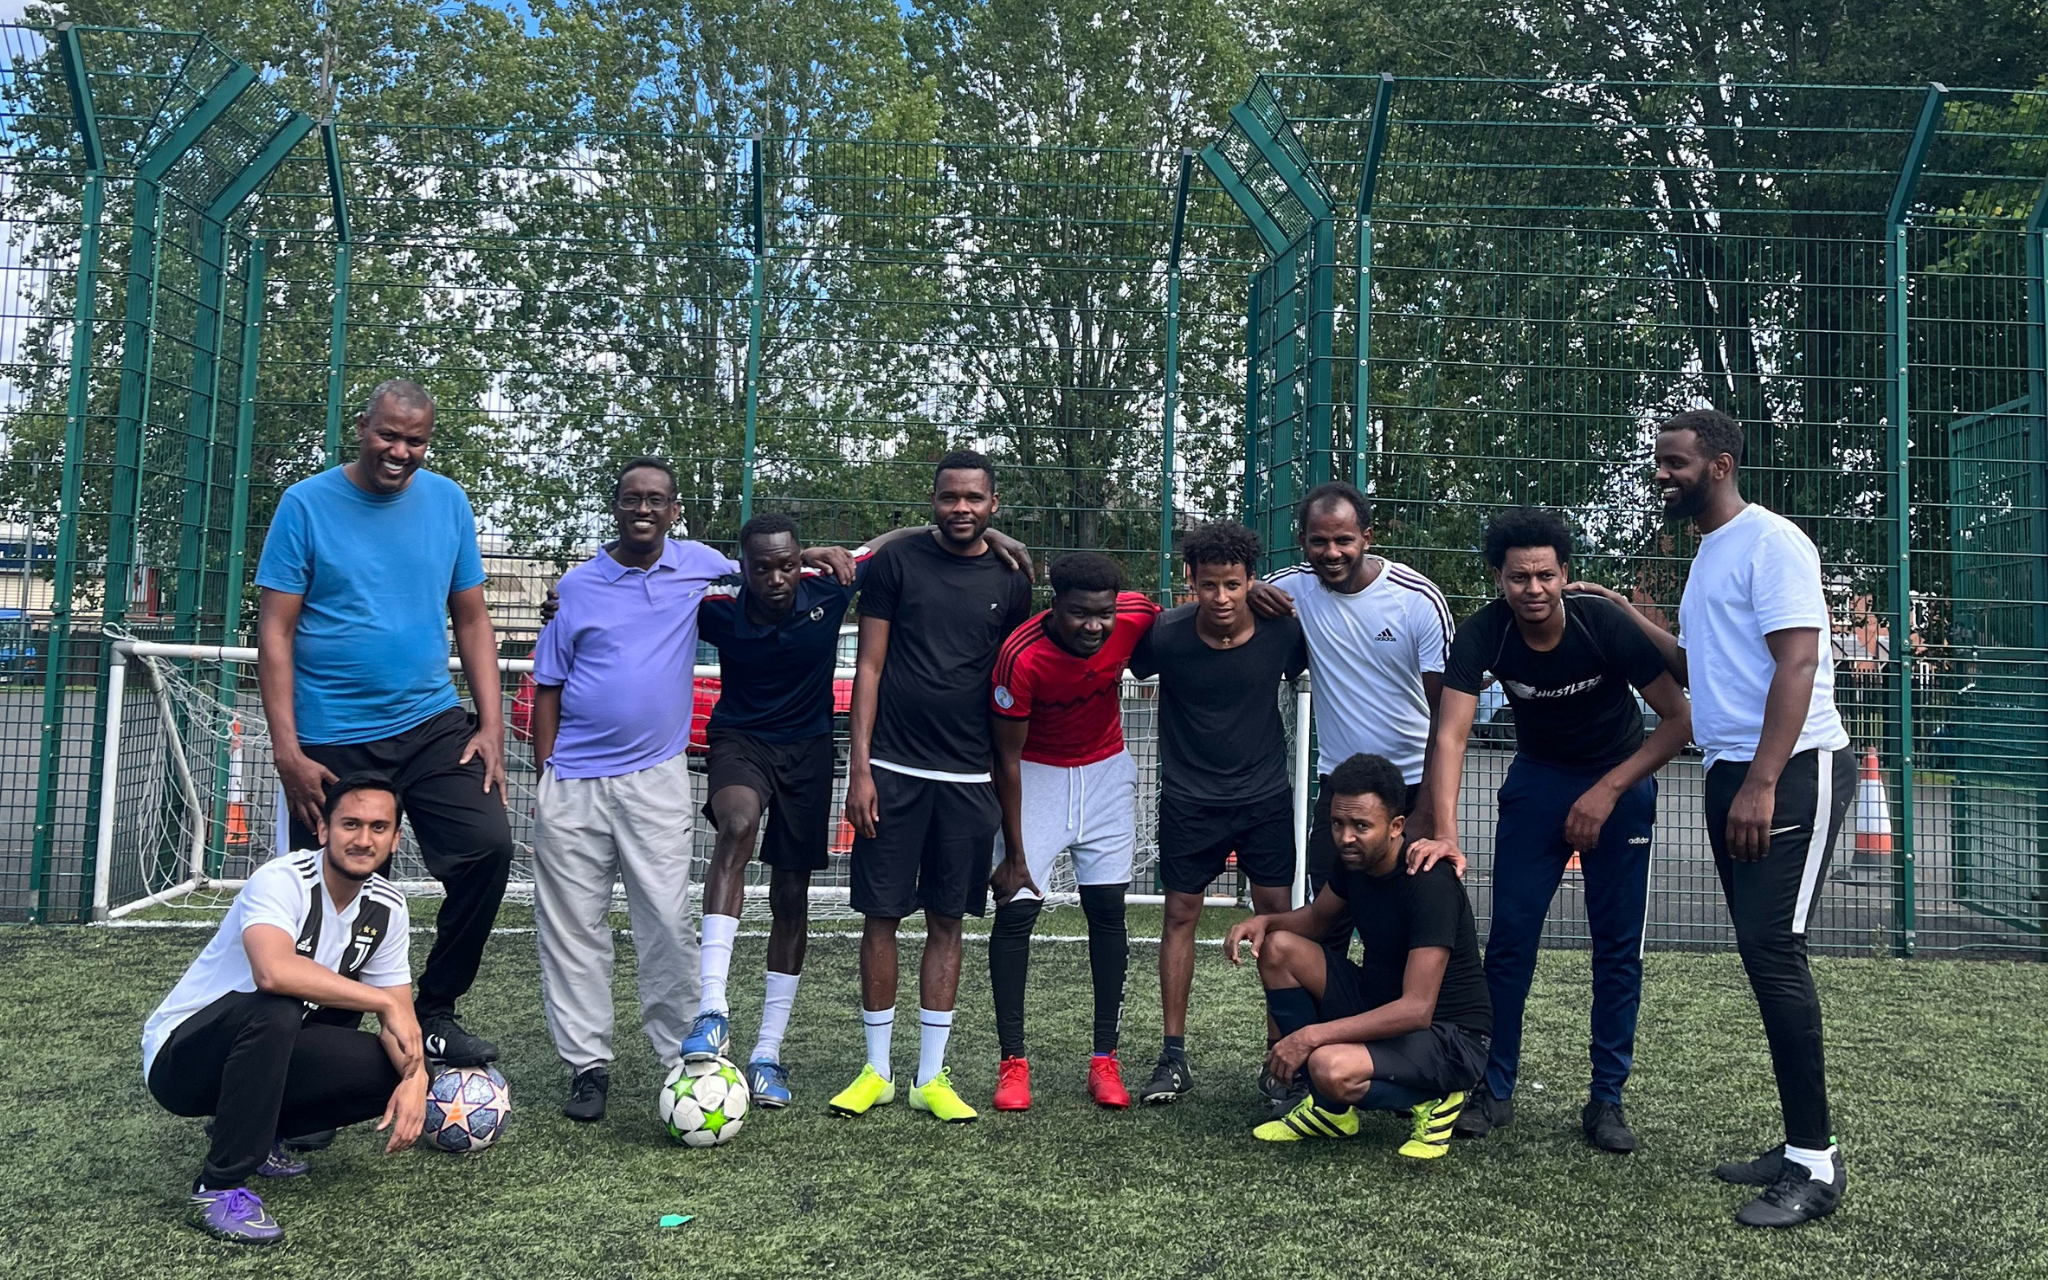 Football brings refugees and host community together in Angola